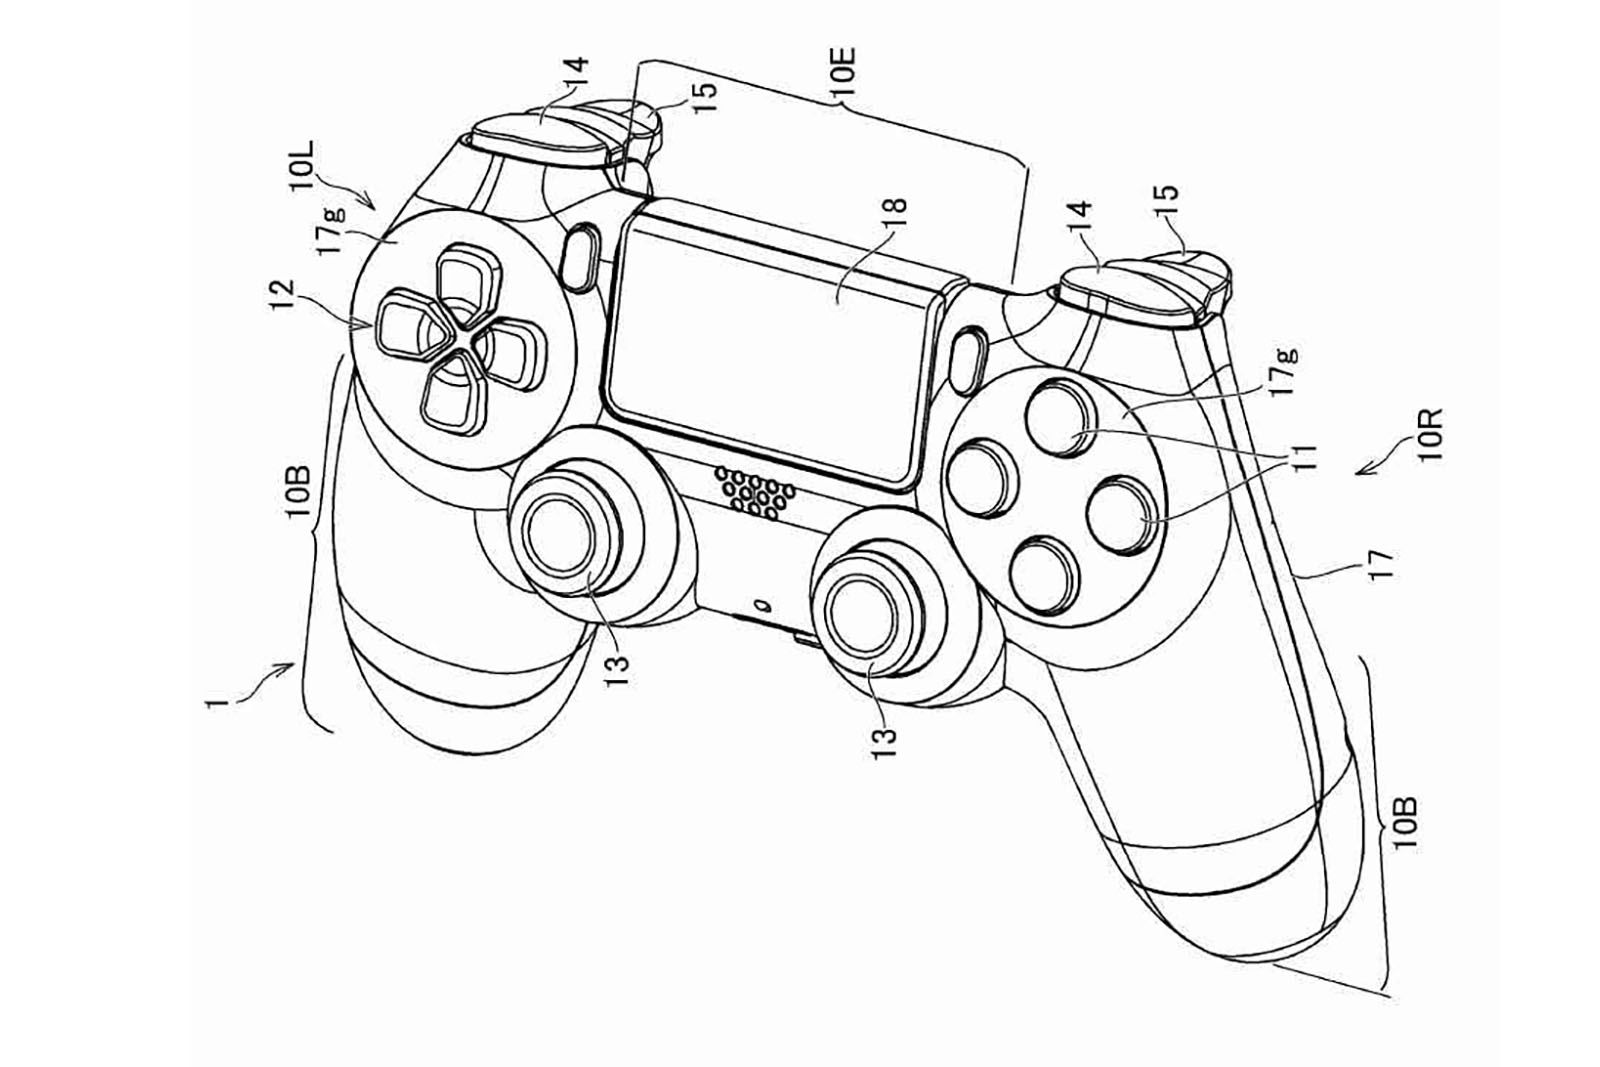 PS5 controller shown in patent gains two rear buttons but has one major thing missing image 2